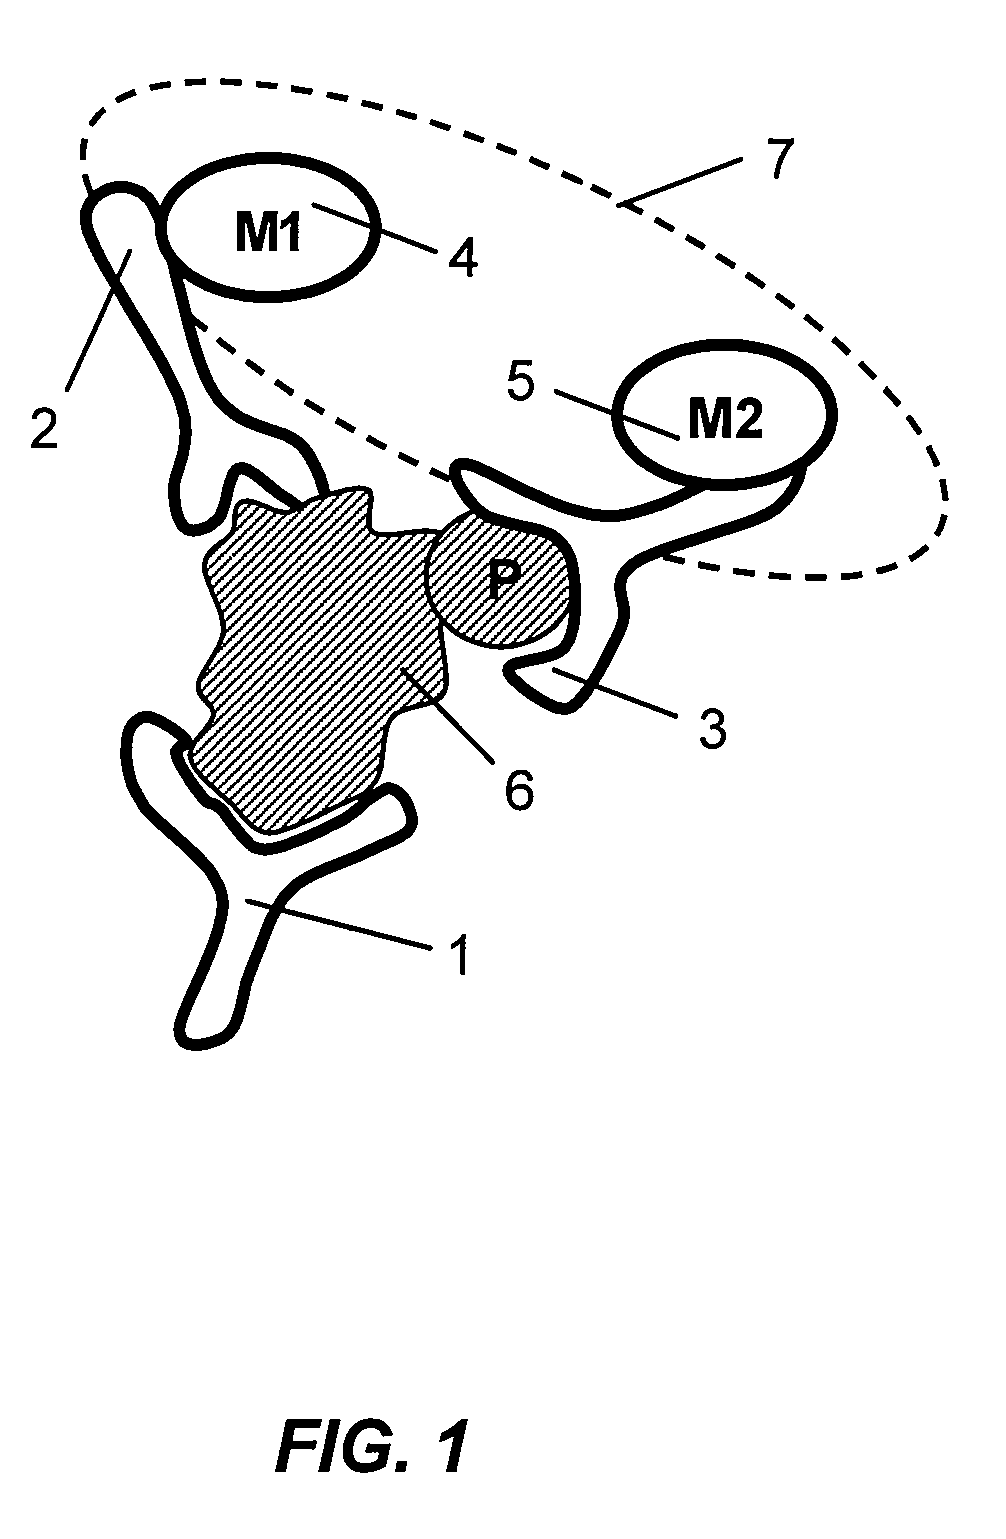 Antibody-based arrays for detecting multiple signal transducers in rate circulating cells